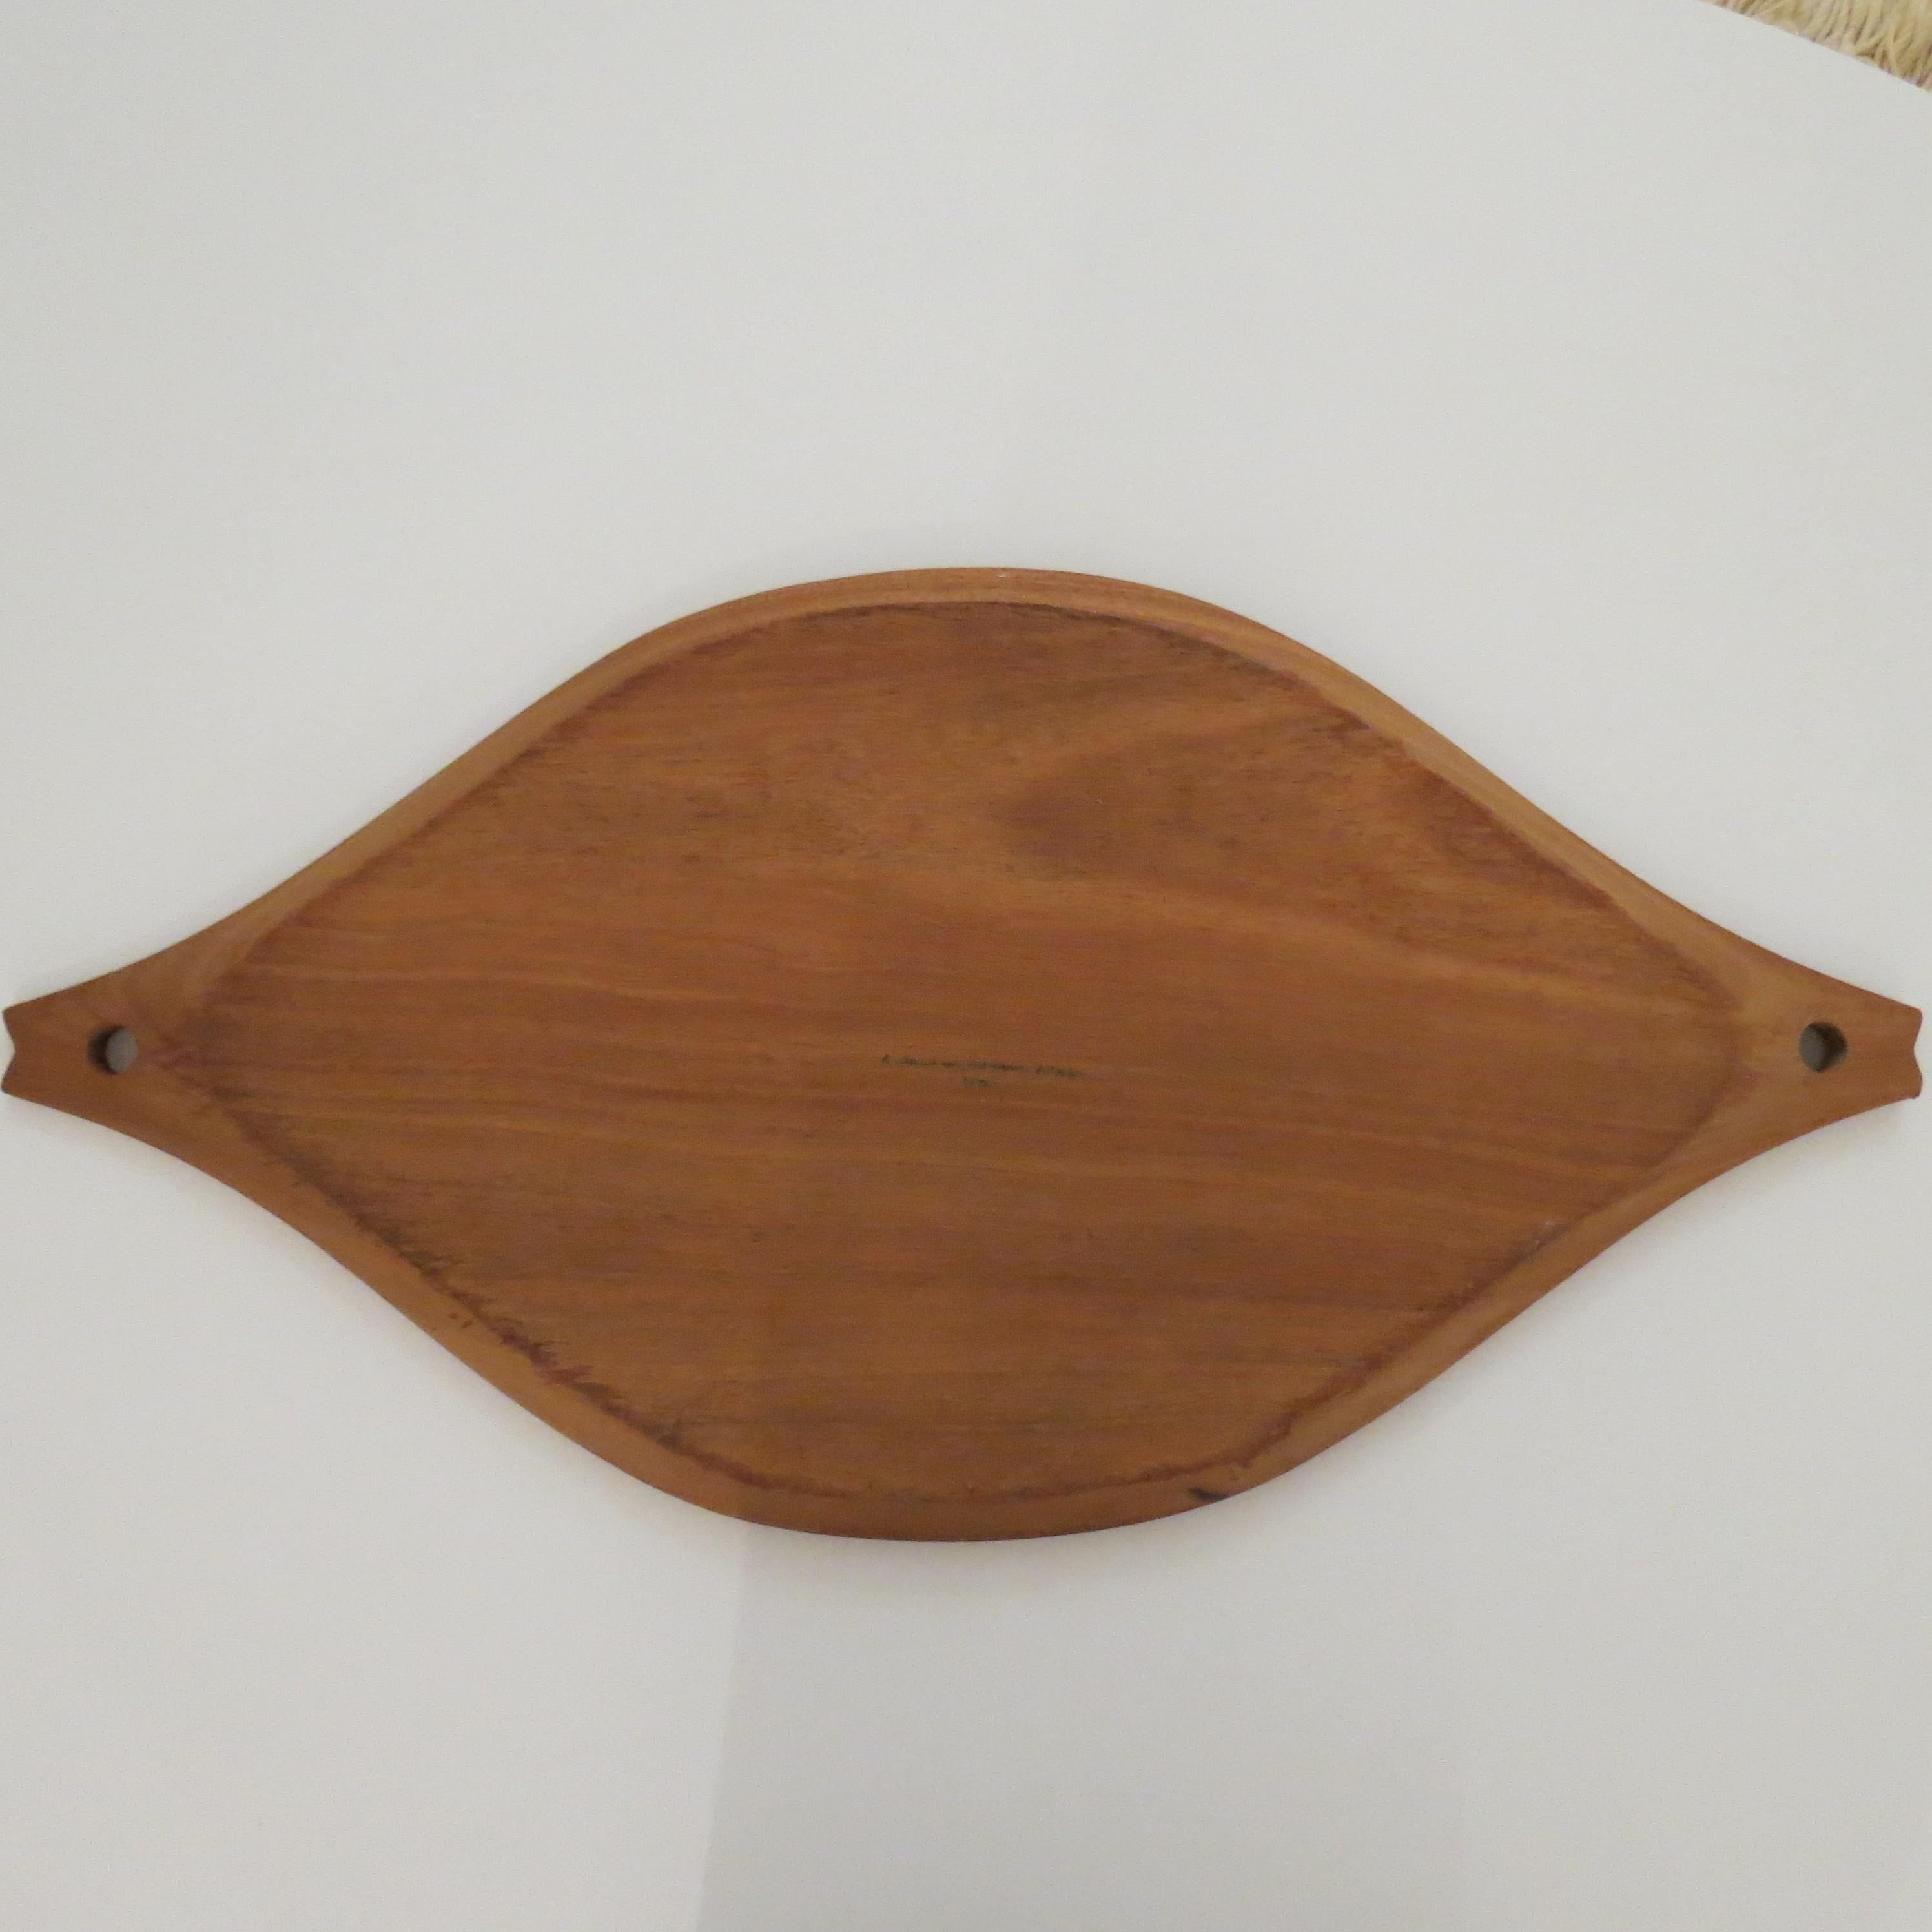 Midcentury Teak Tray With Tile Insert By Allan Wallwork 1970 For Sale 5